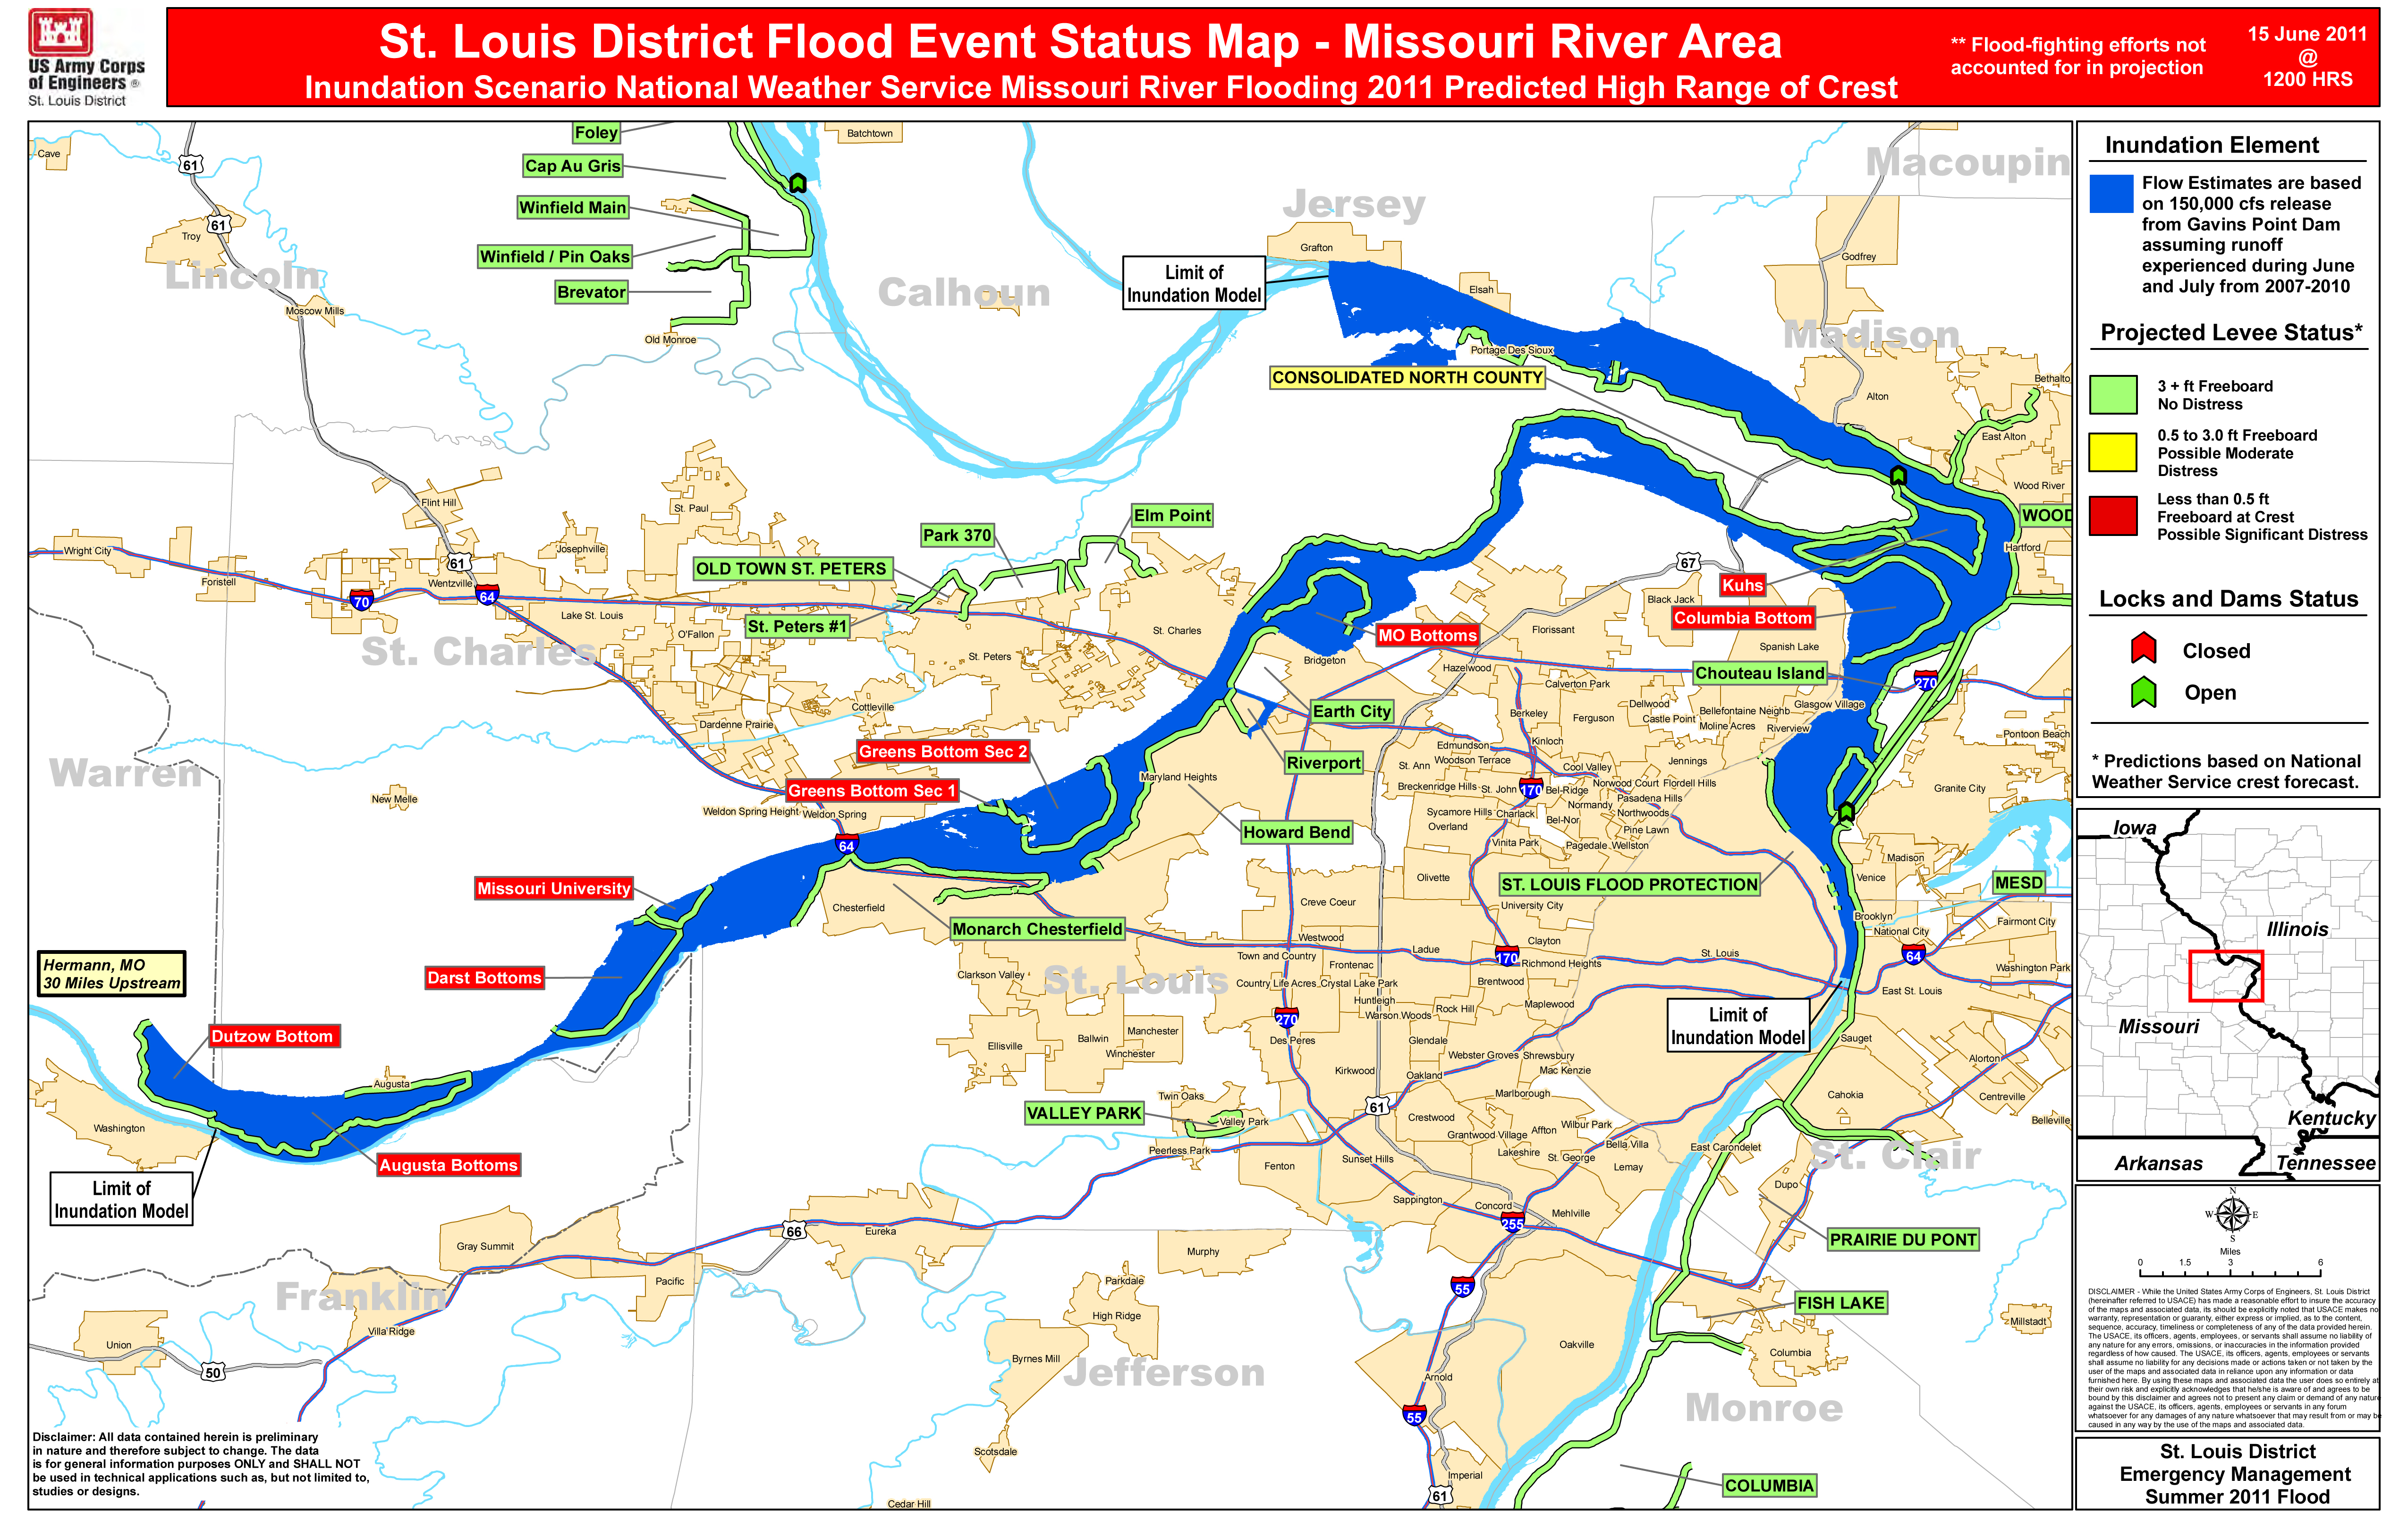 Extent of Missouri River flooding near St. Louis to depend on summer